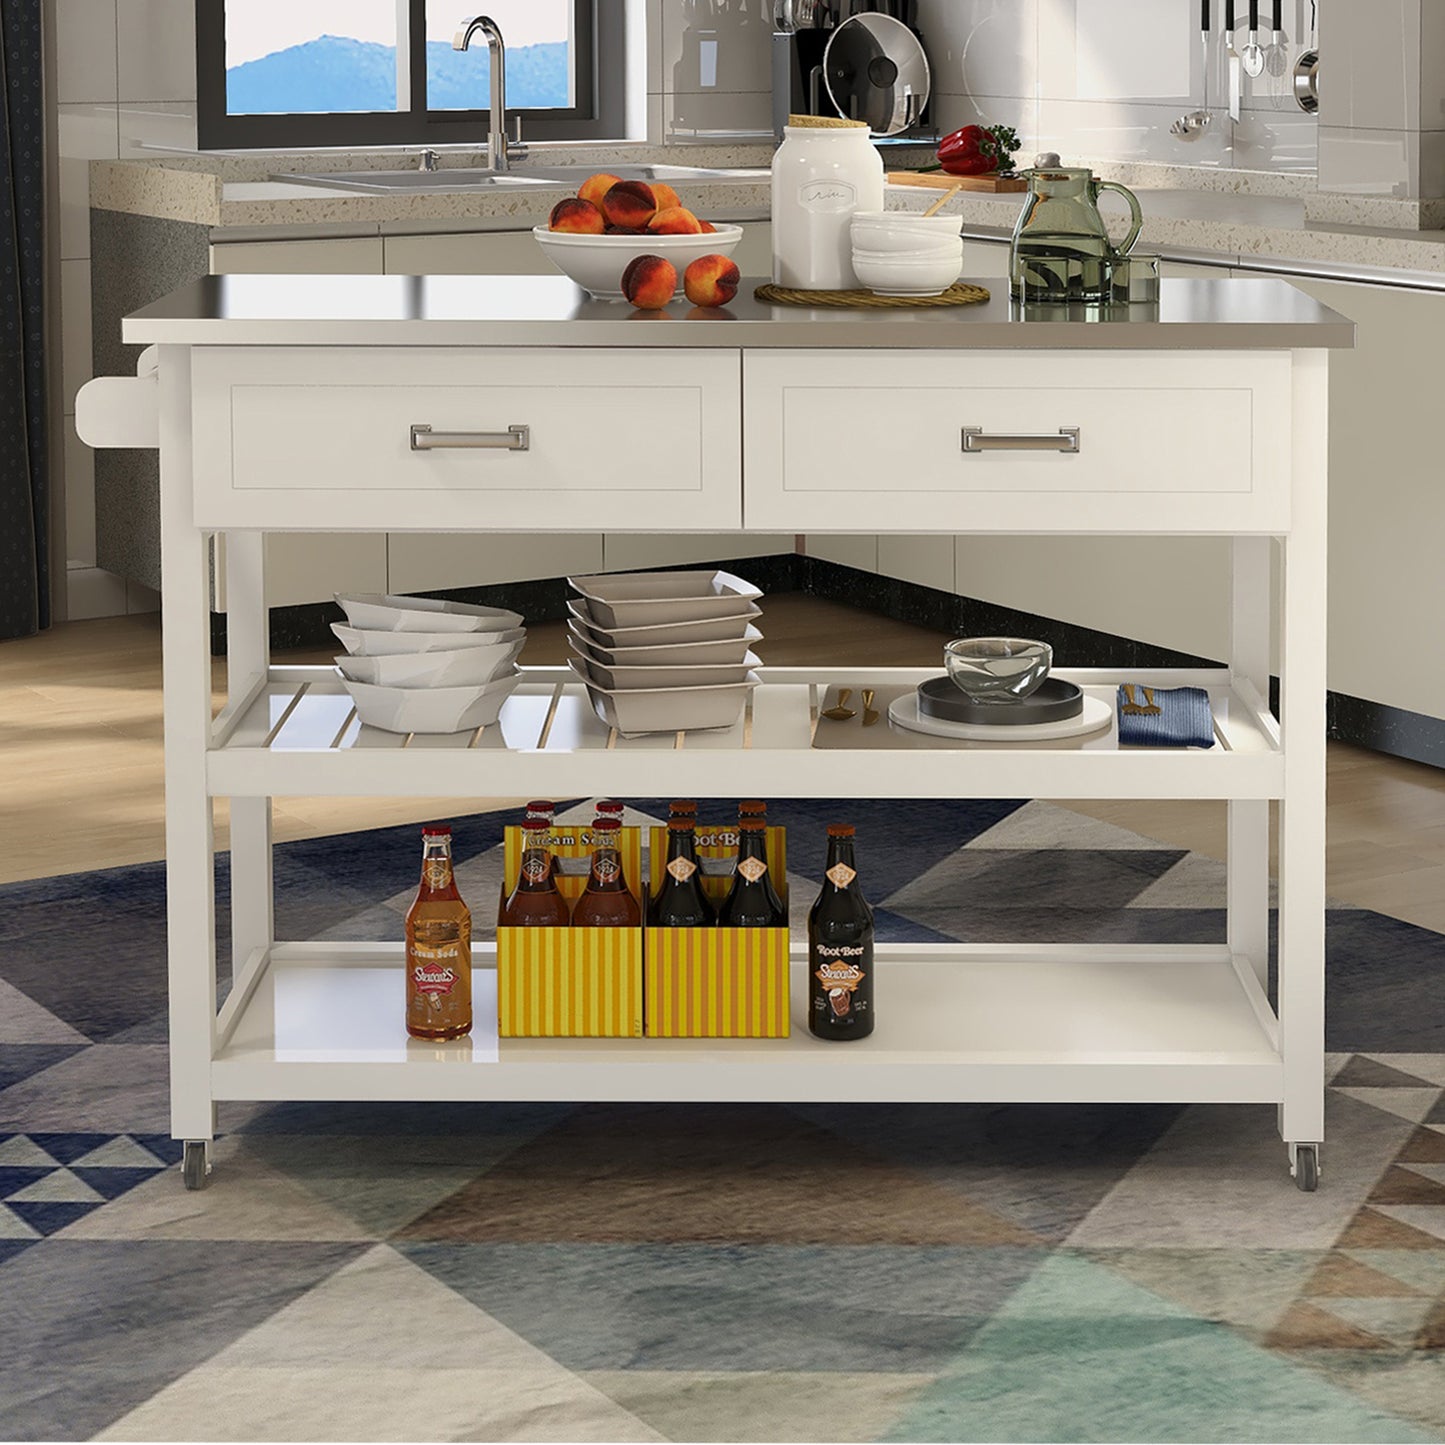 White Kitchen Cart with Stainless Steel Table Top & 2 Drawers